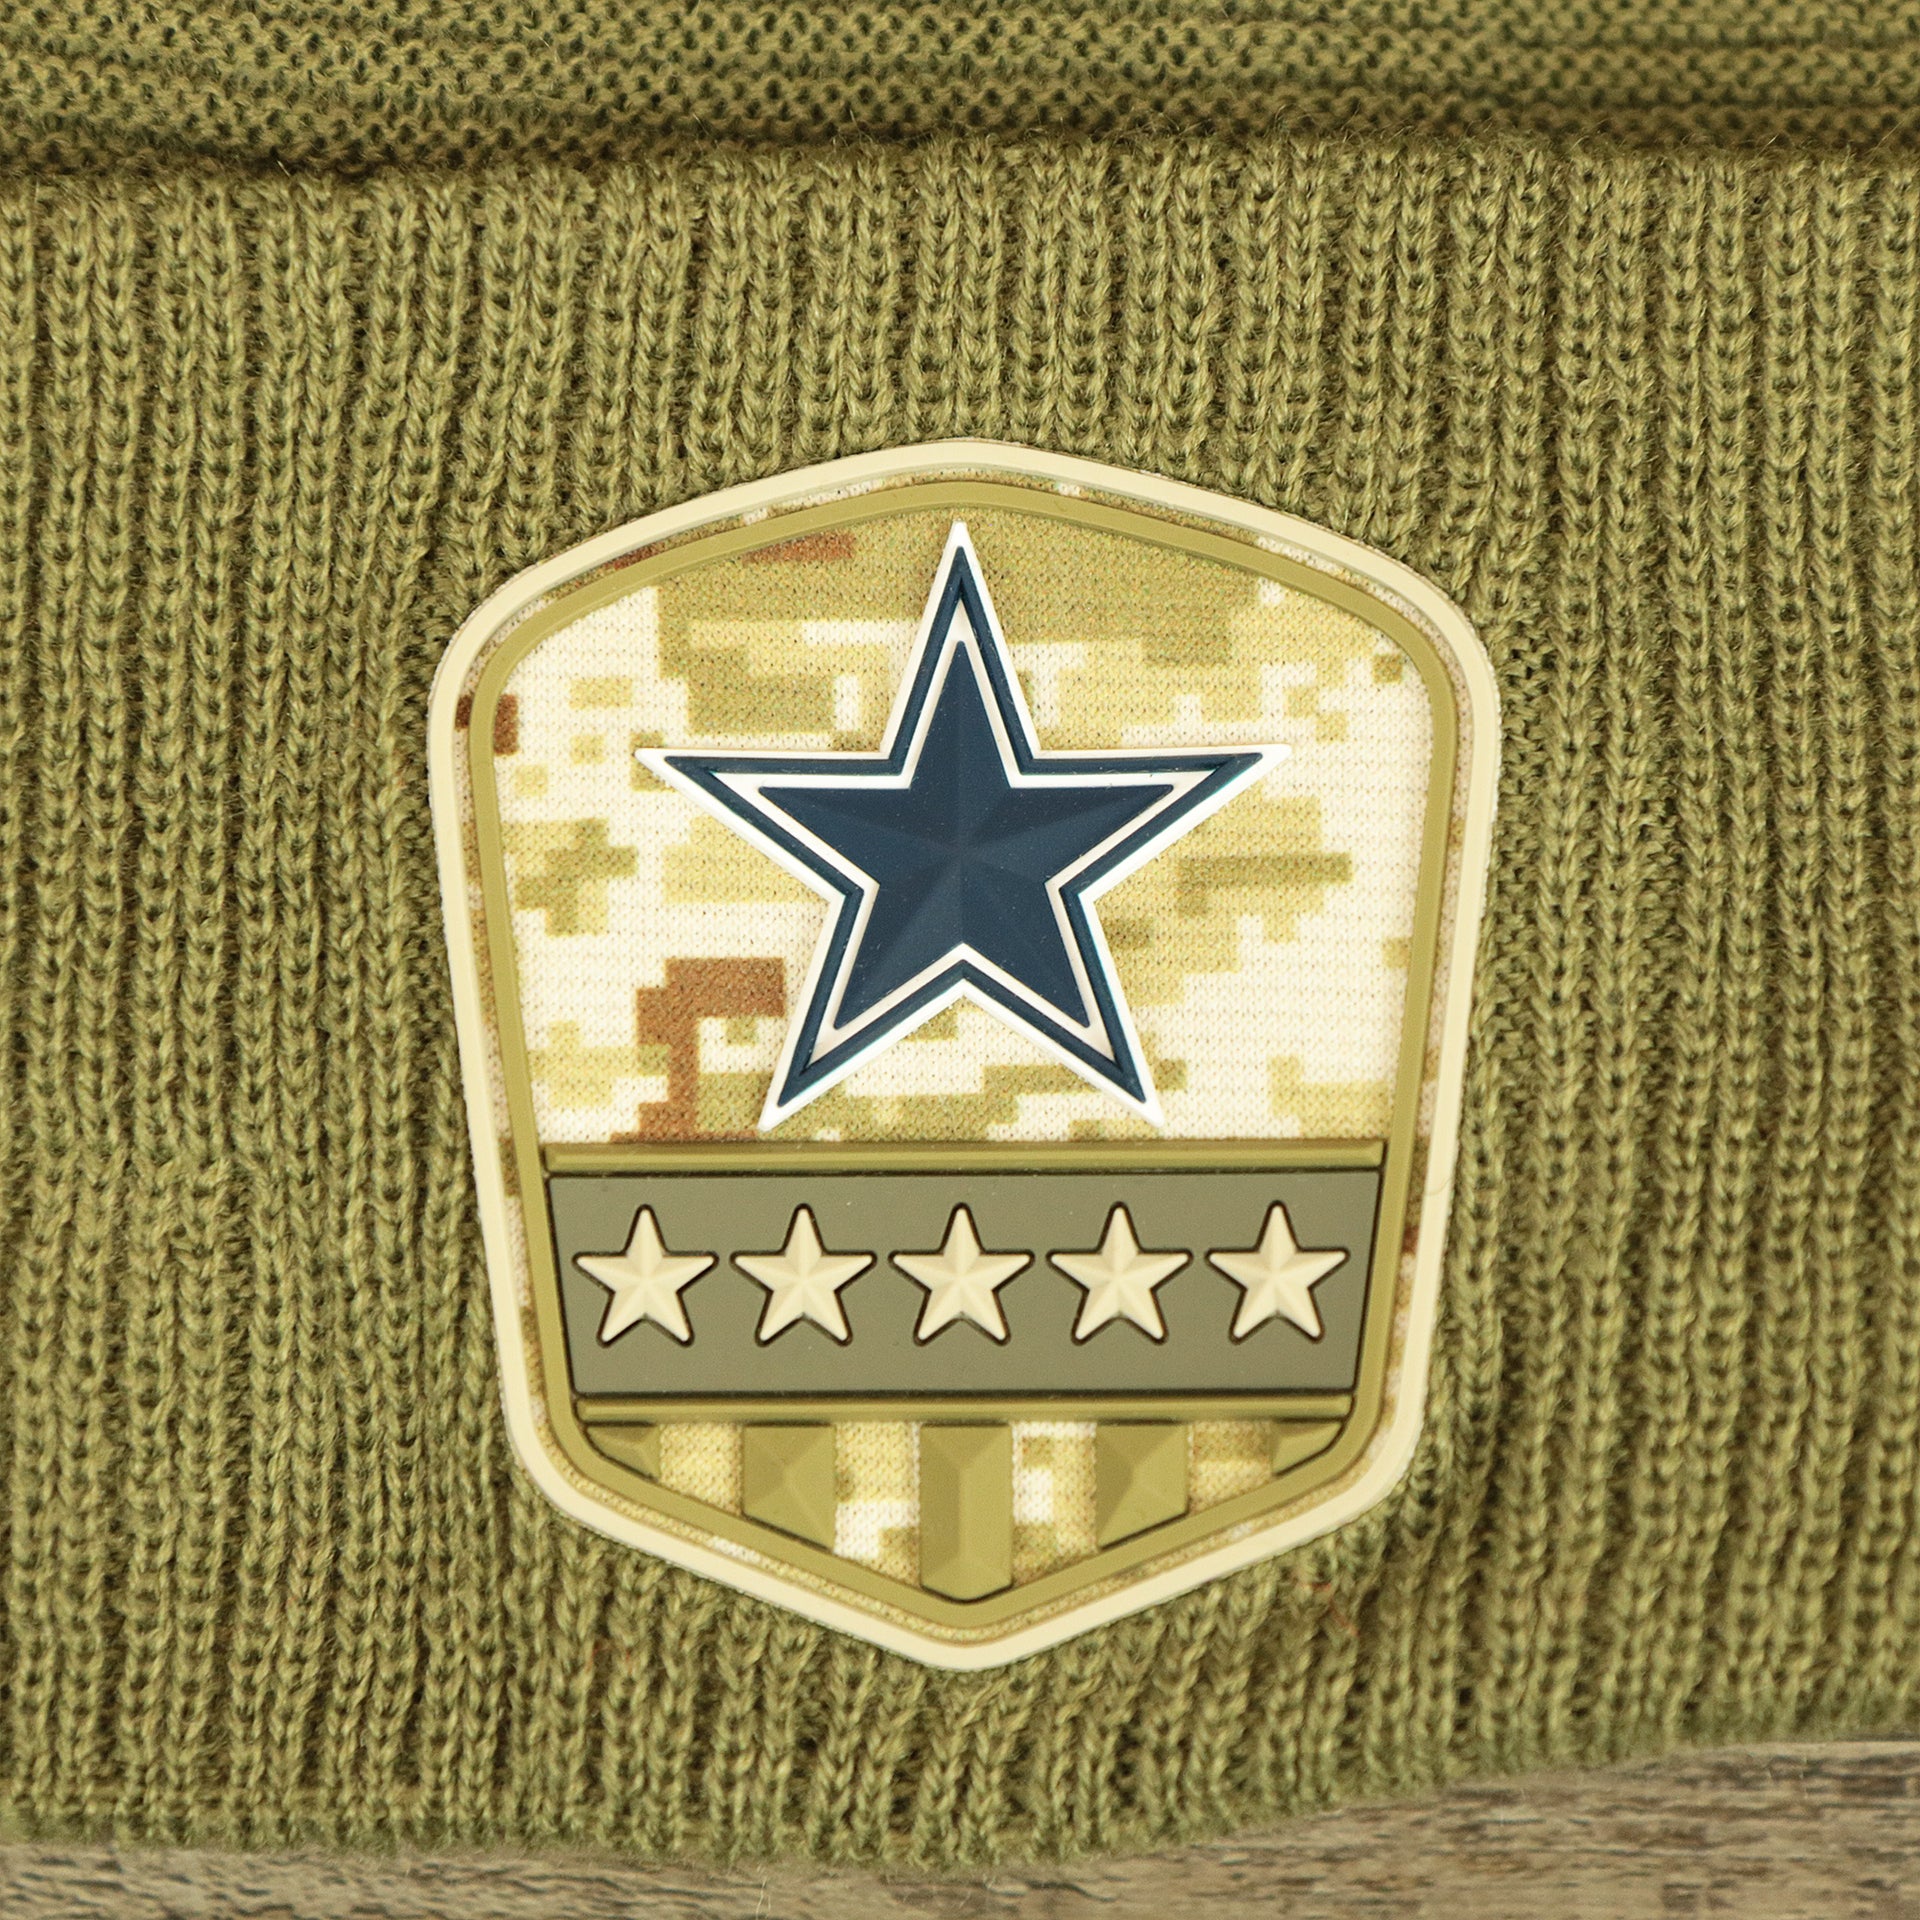 The Rubber Cowboys Logo Patch on the Dallas Cowboys Salute To Service Ribbon Rubber Military Cowboys Patch On Field NFL Beanie | Military Green Beanie